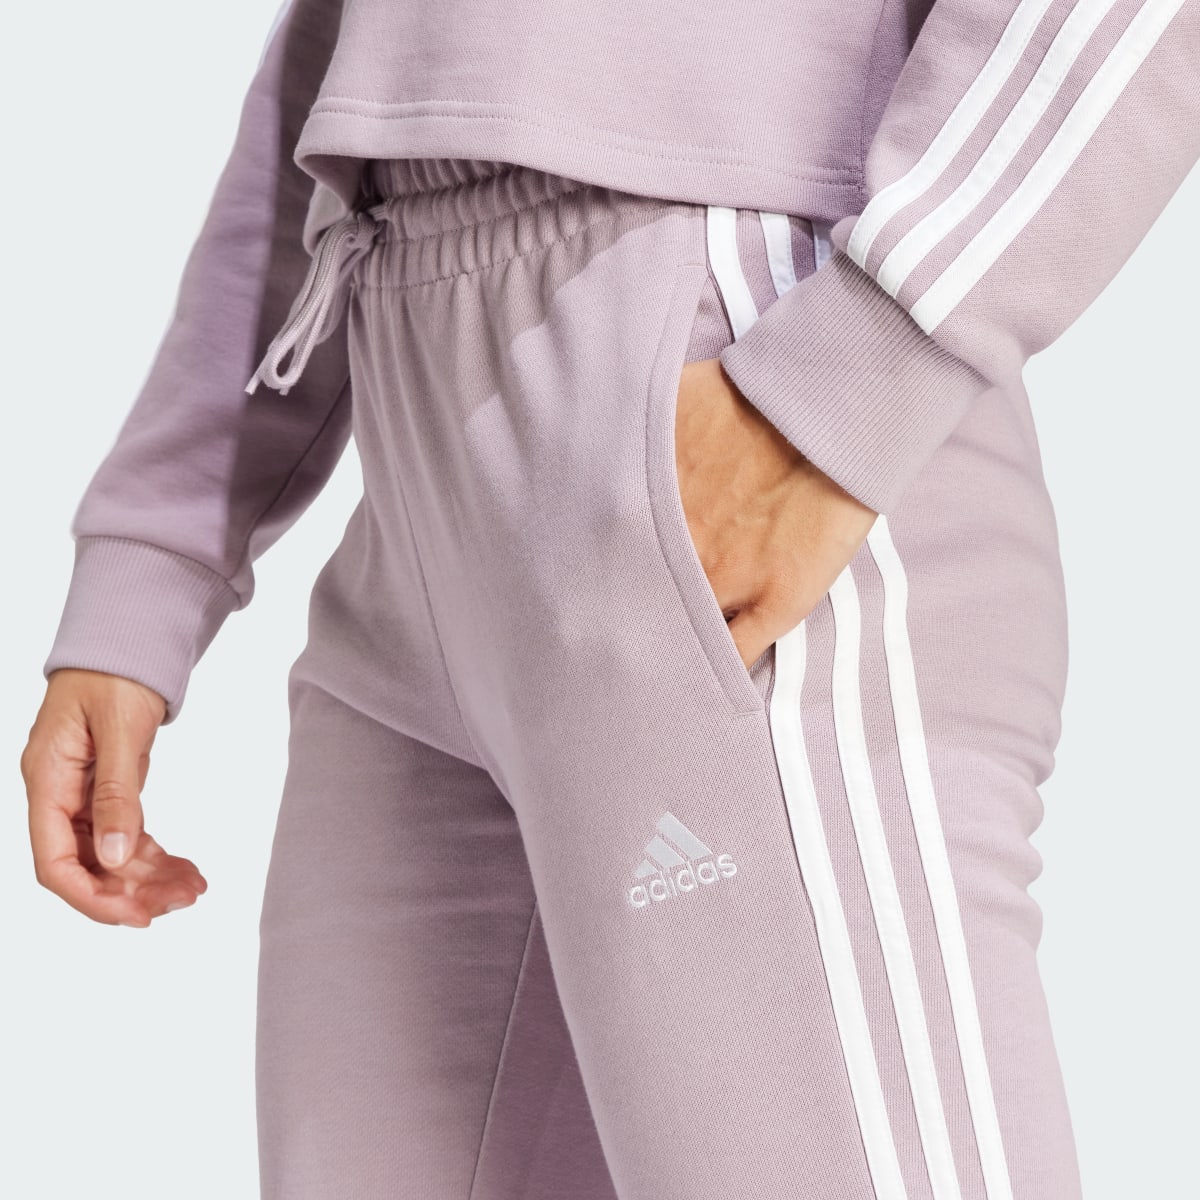 Adidas Essentials 3-Stripes French Terry Cuffed Pants. 5